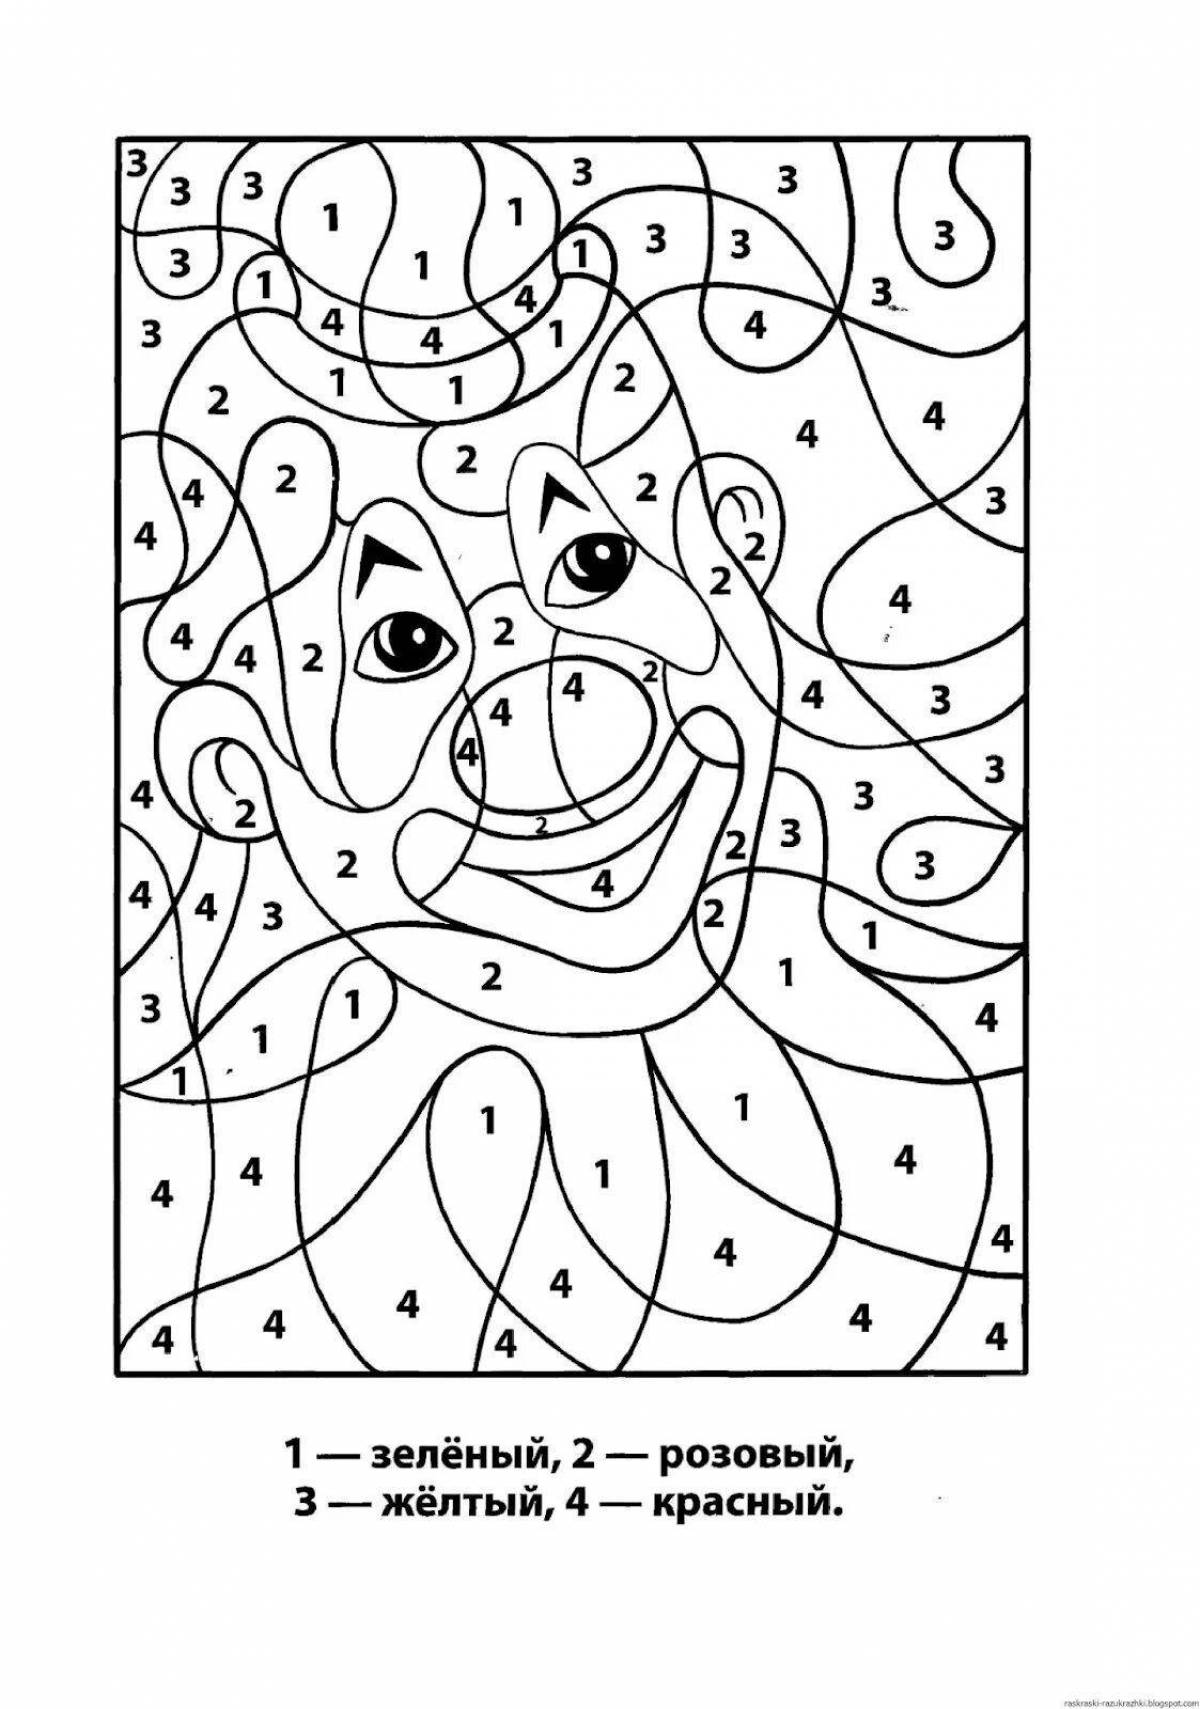 Fun coloring book for kids 6-7 years old